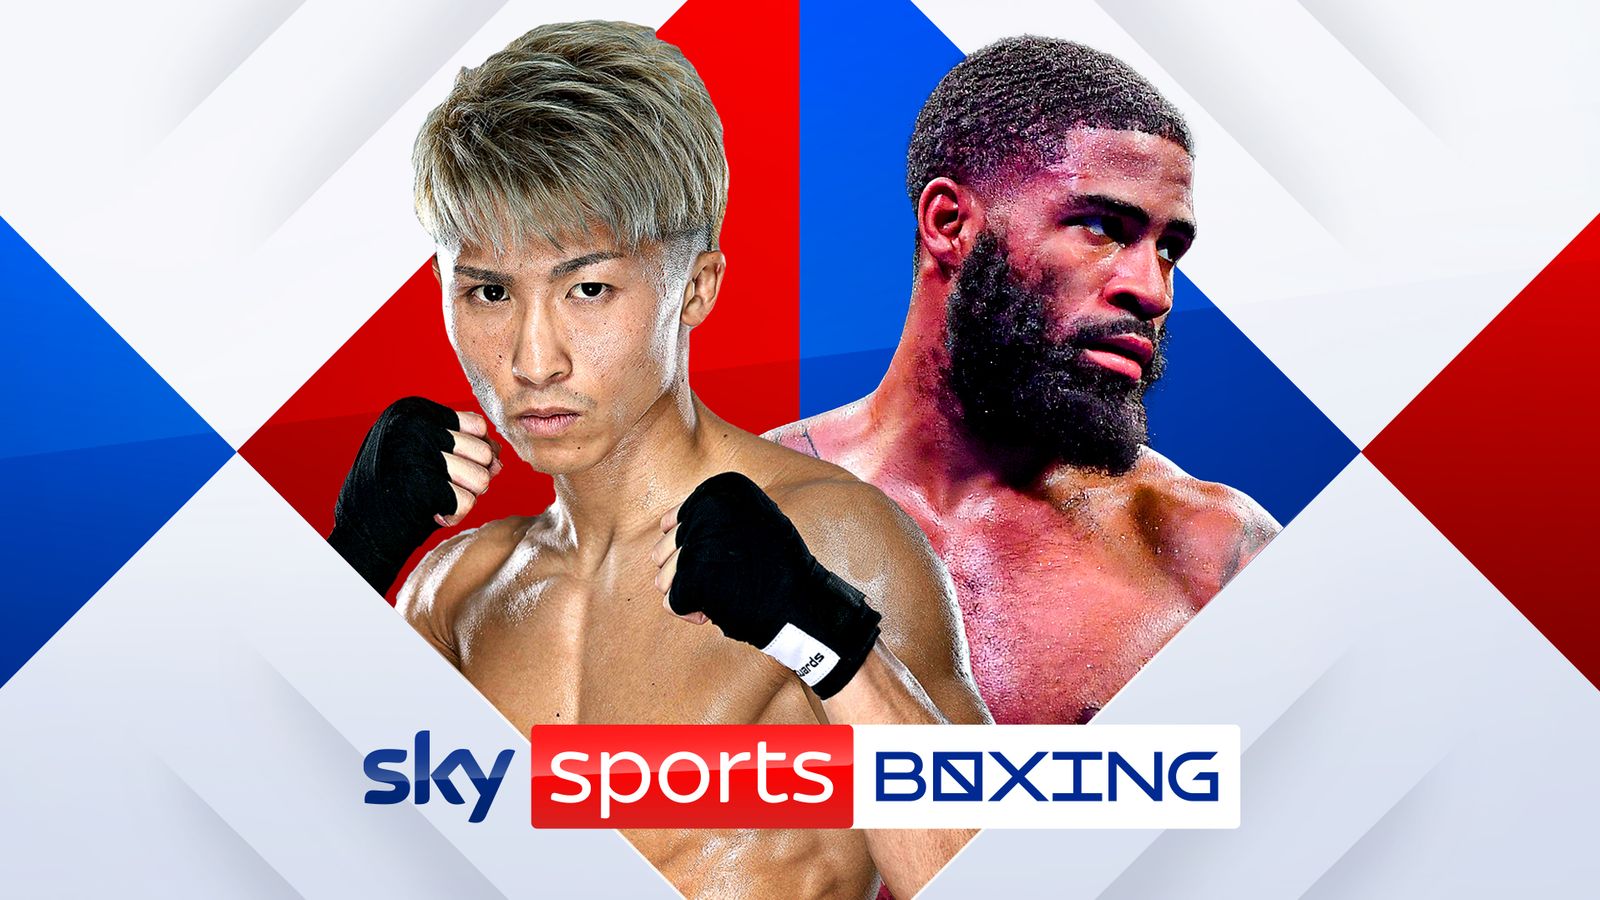 Stephen Fulton vs Naoya Inoue unified world title fight live on Sky Sports on May 7 from the Yokohama Arena